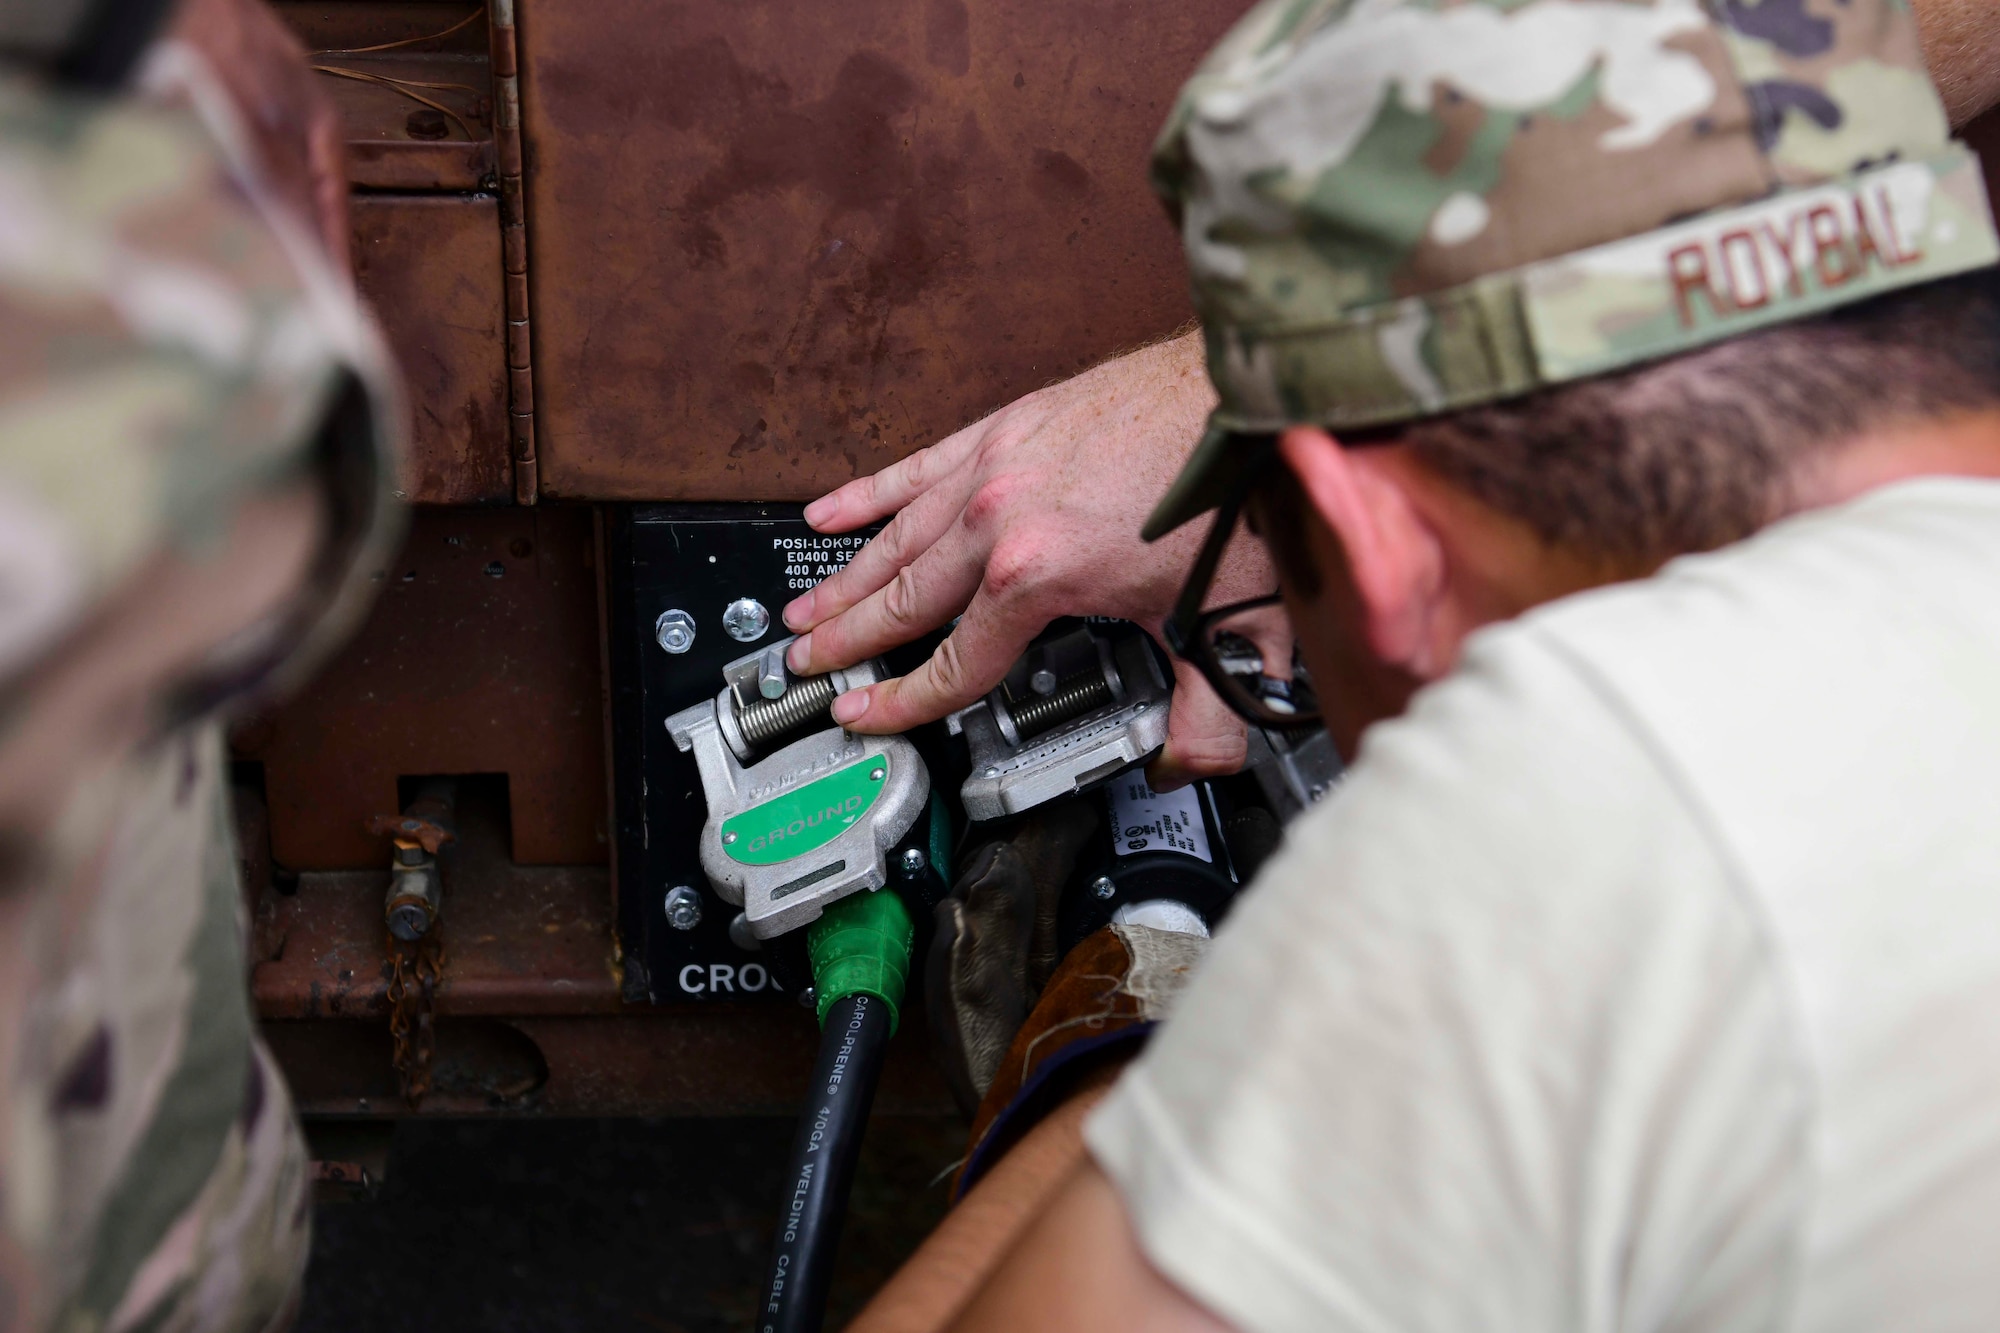 Senior Airman Fred Roybal, 4th Civil Engineer Squadron power and production journeyman, connects electrical lines to a generator ahead of Hurricane Dorian Sept. 4, 2019, at Seymour Johnson Air Force Base, North Carolina. The 4th CES, to include equipment operators, electricians, plumbers, structural craftsman, heating, ventilation and air conditioning, and production technicians, are providing 24-hour response and recovery operations during and following Hurricane Dorian. (U.S. Air Force photo by Senior Airman Boyton)